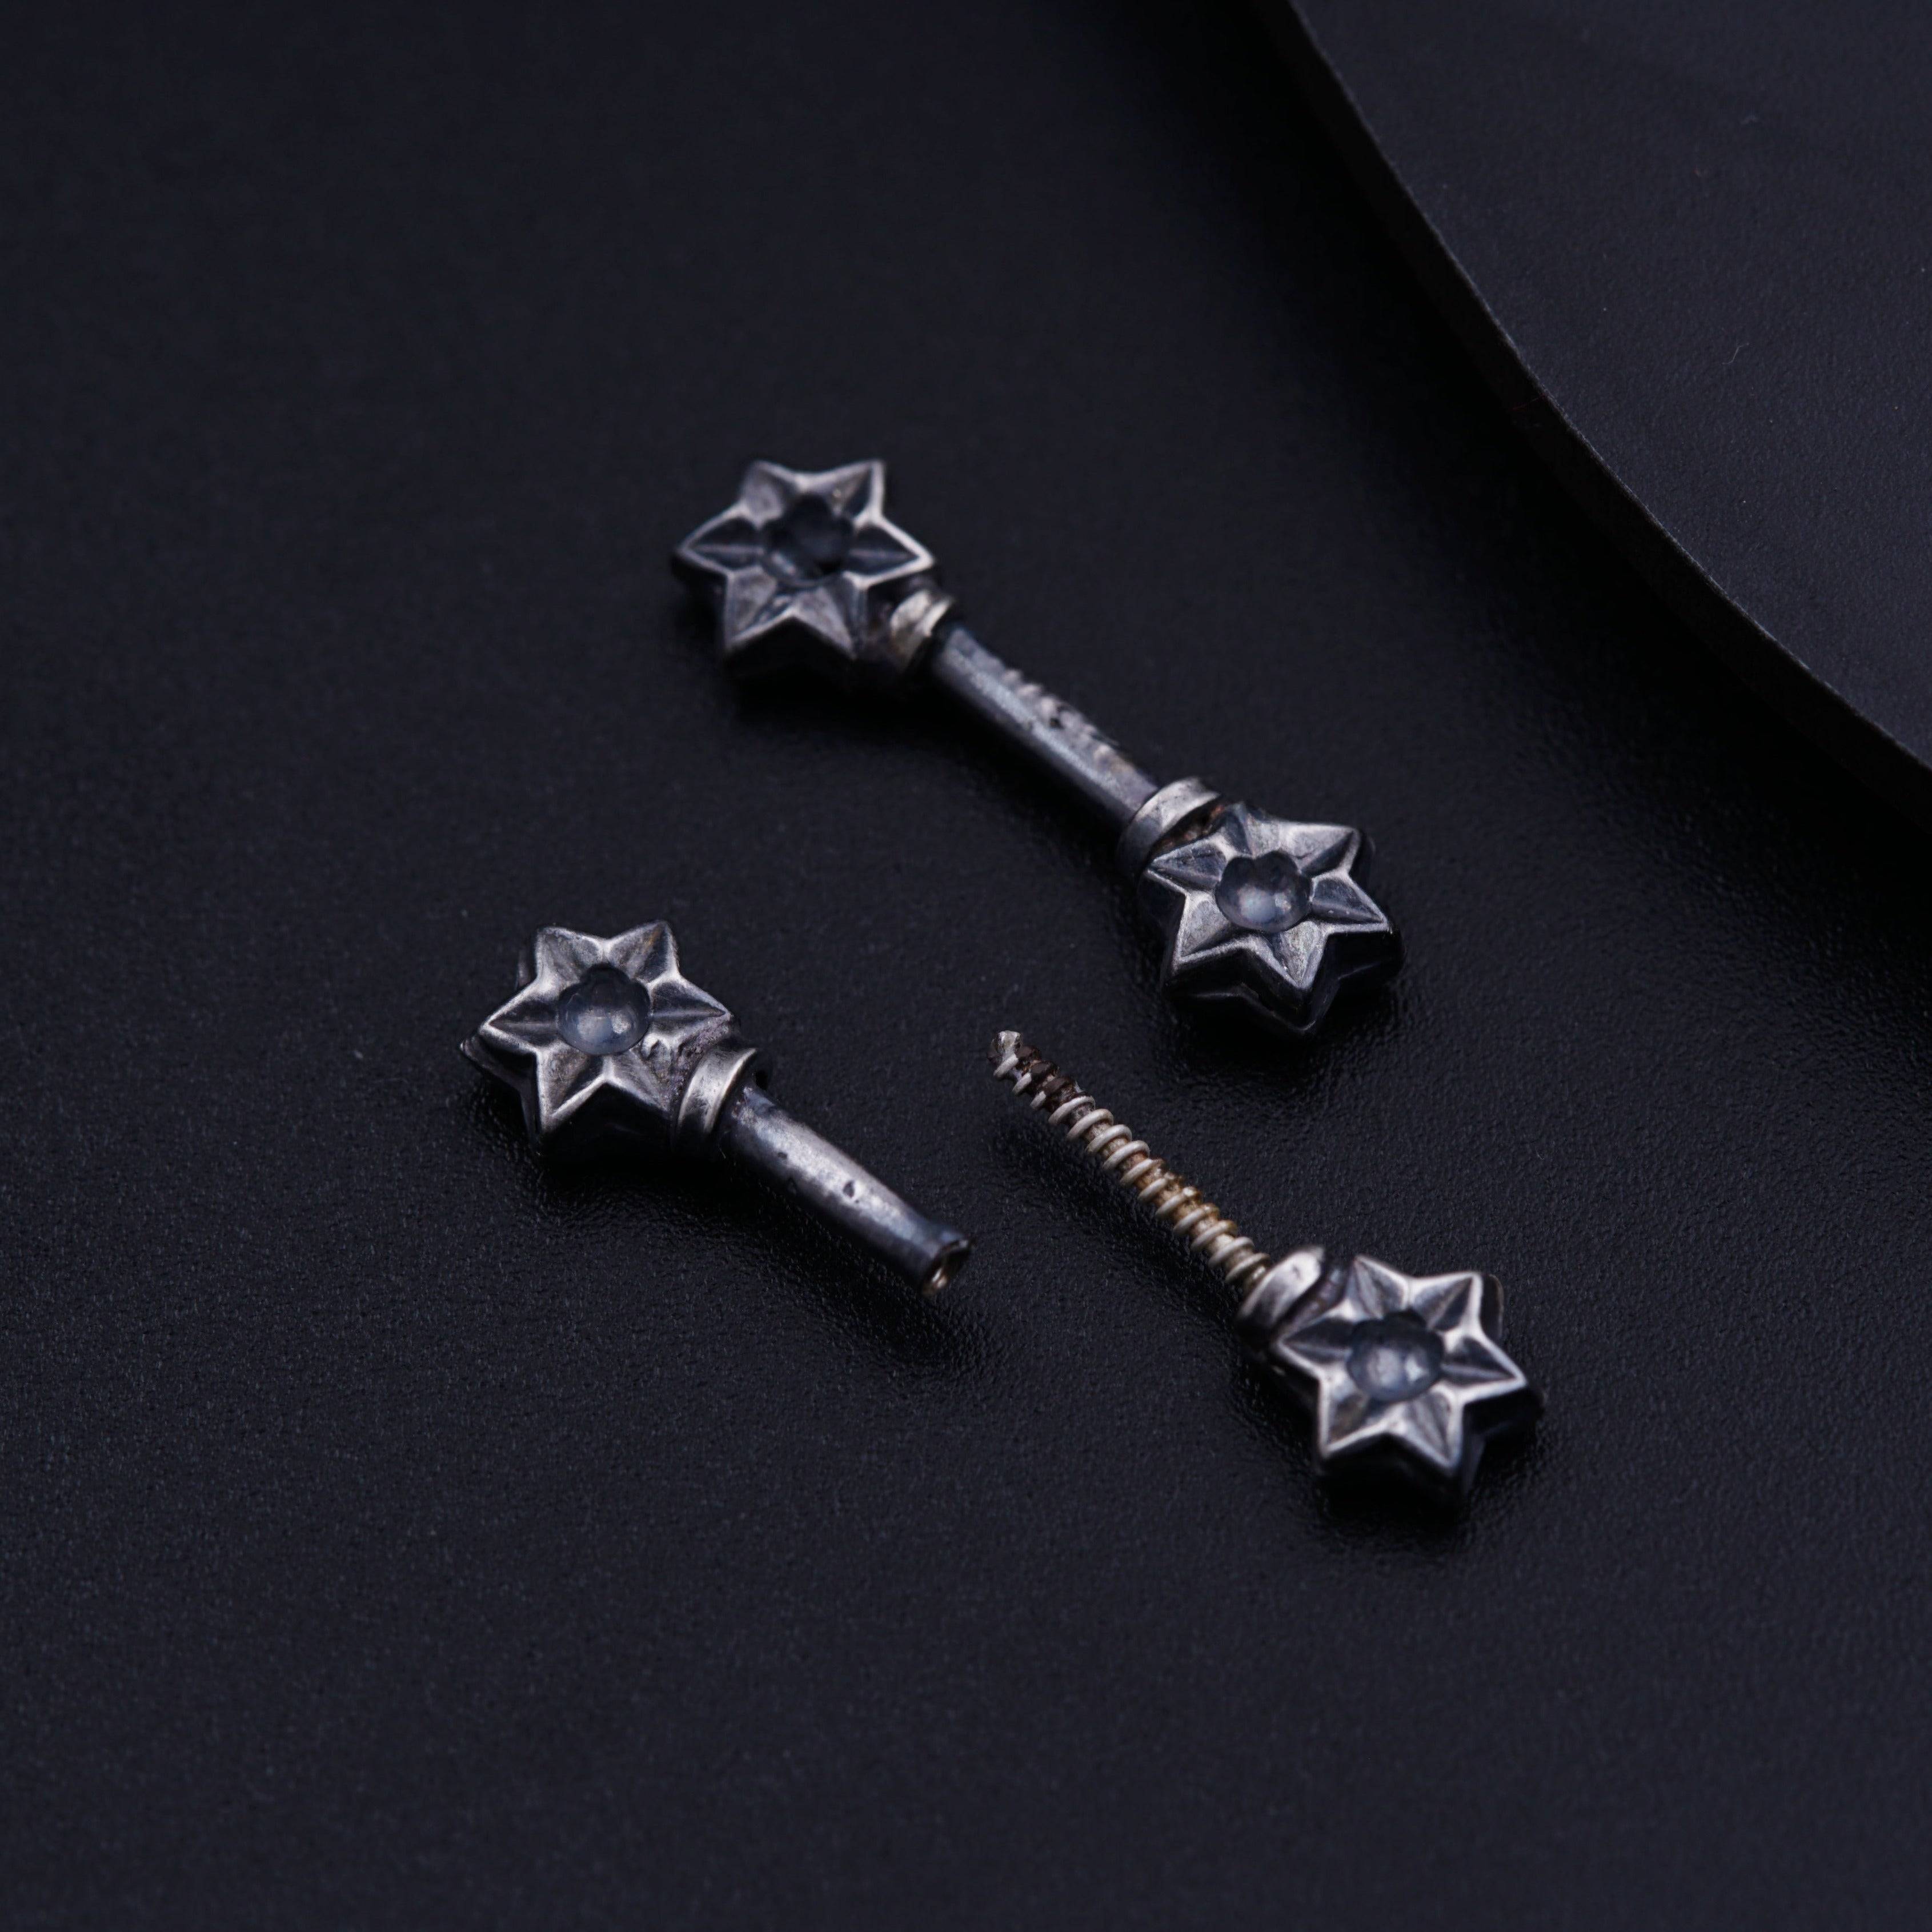 a pair of screws sitting on top of a black surface